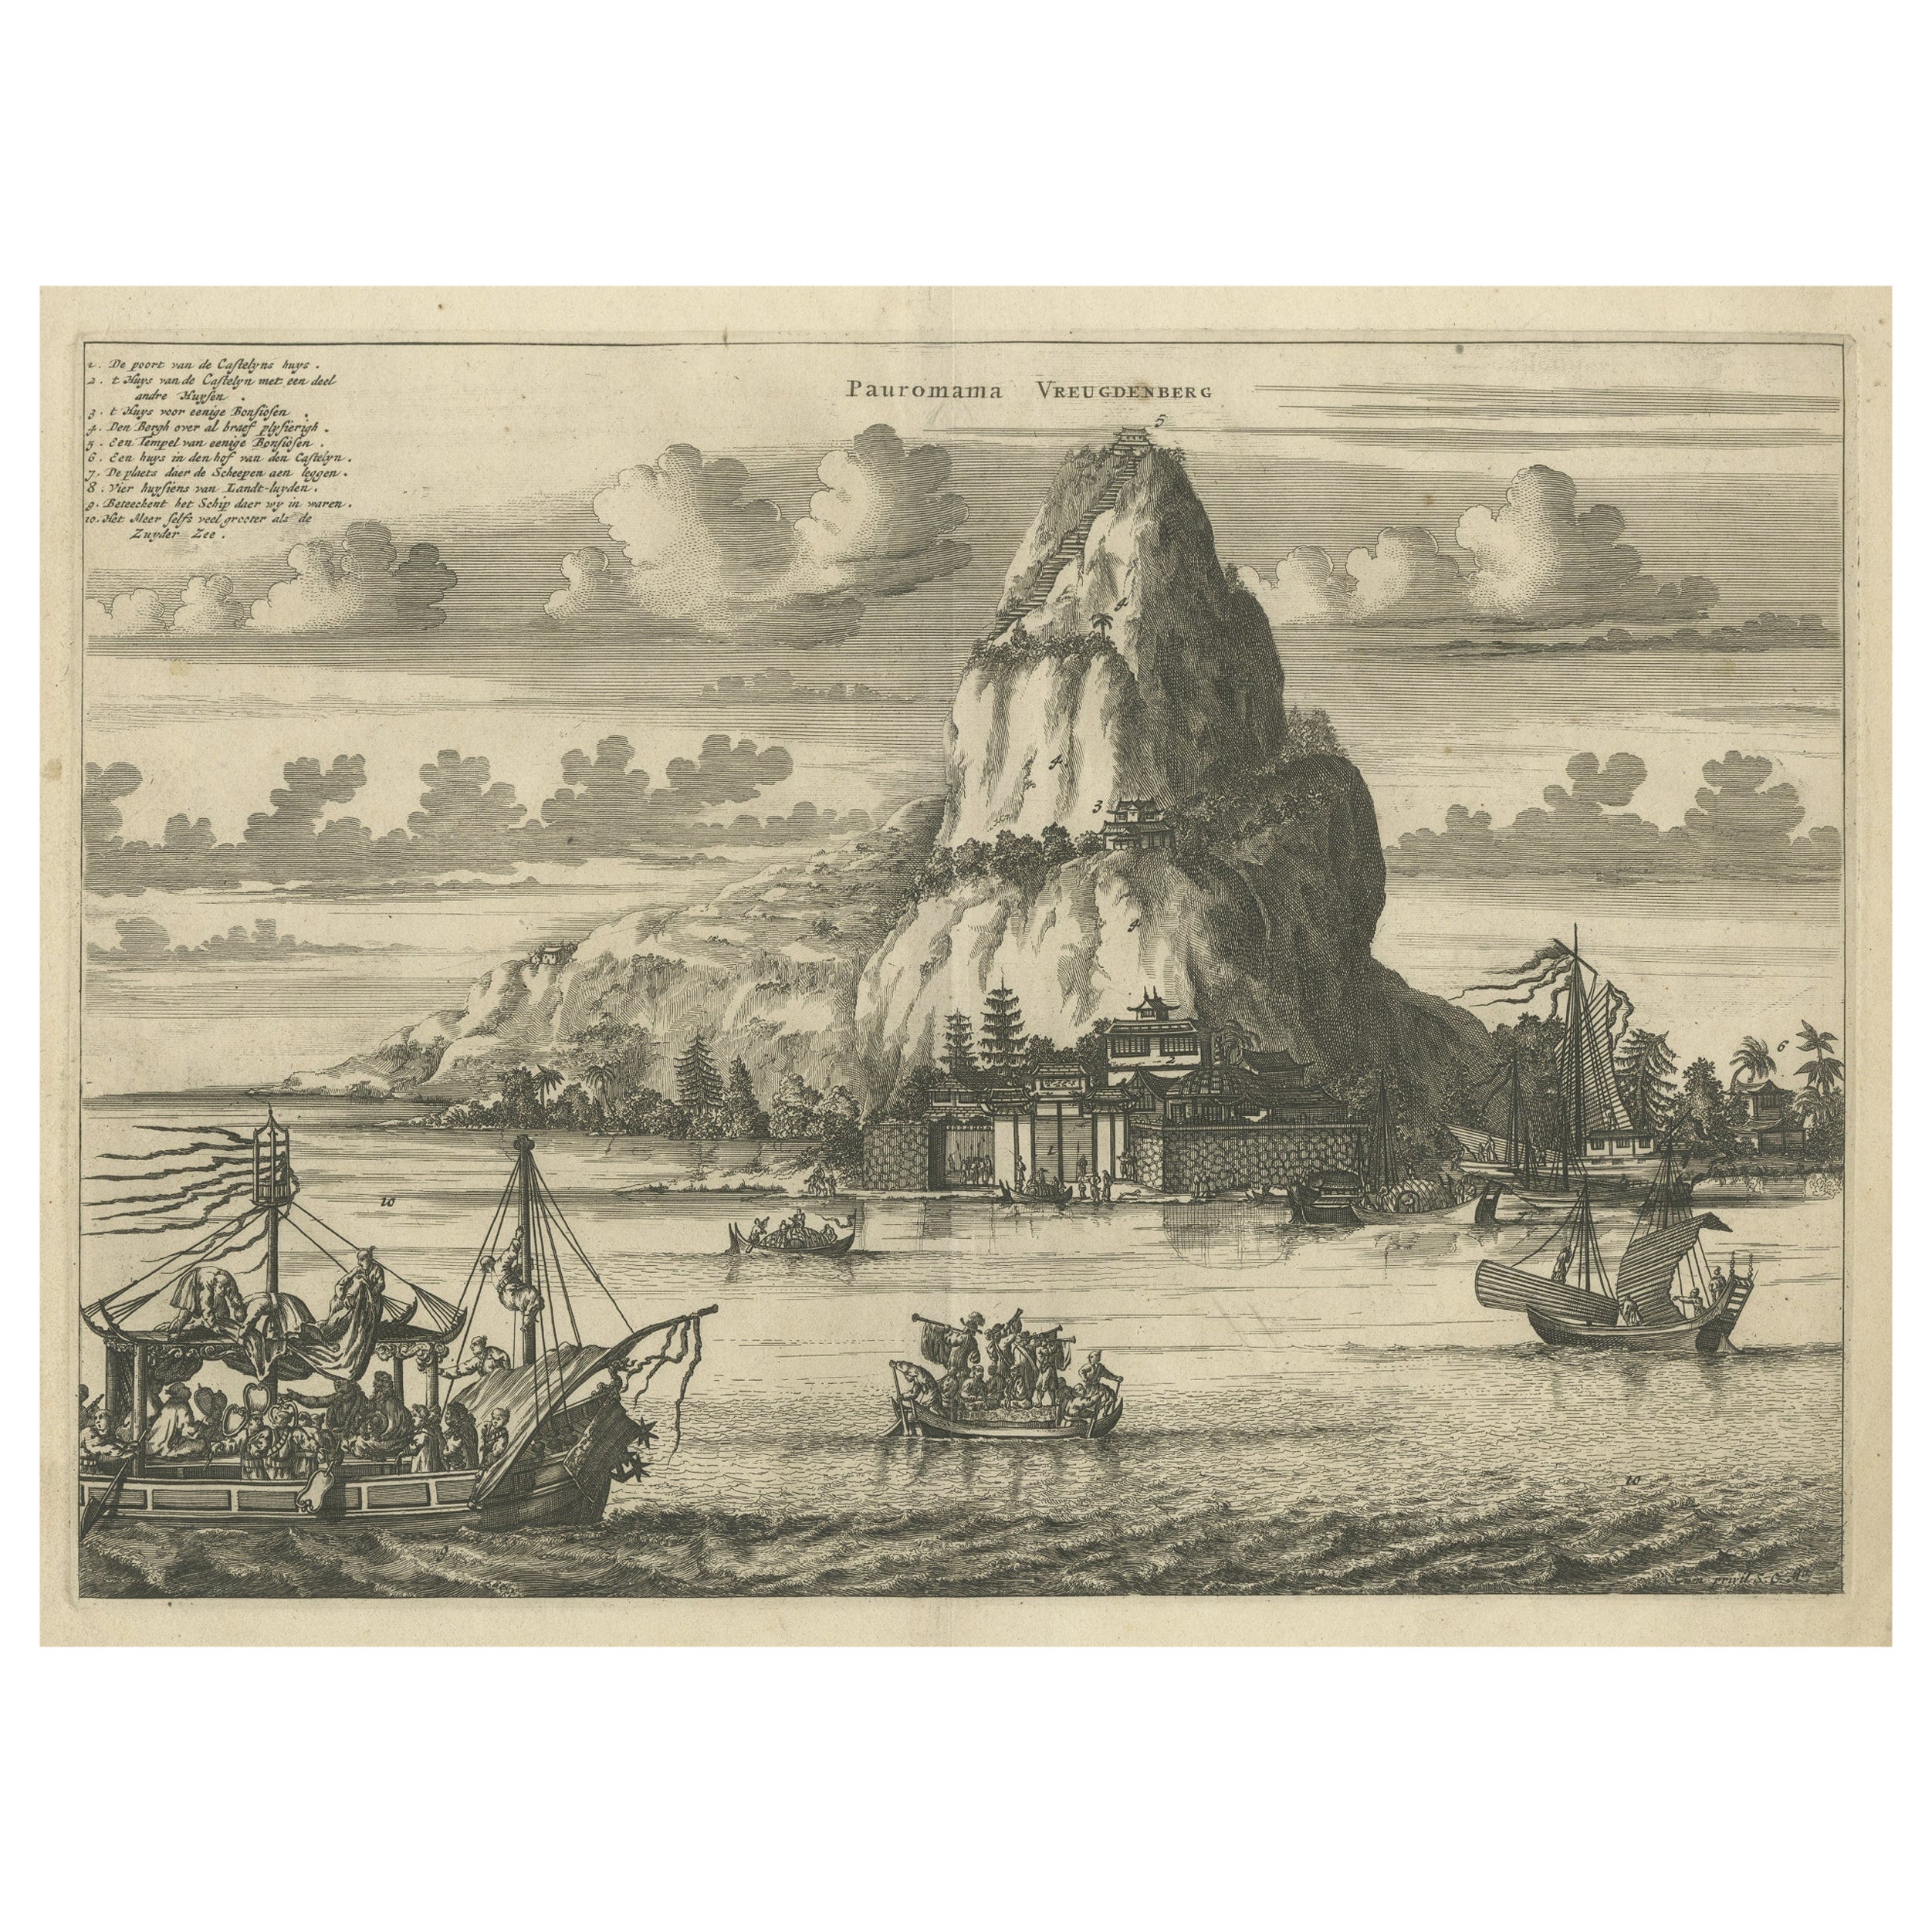 Antique Print of Pauromama or Mount of Pleasure, Japan For Sale